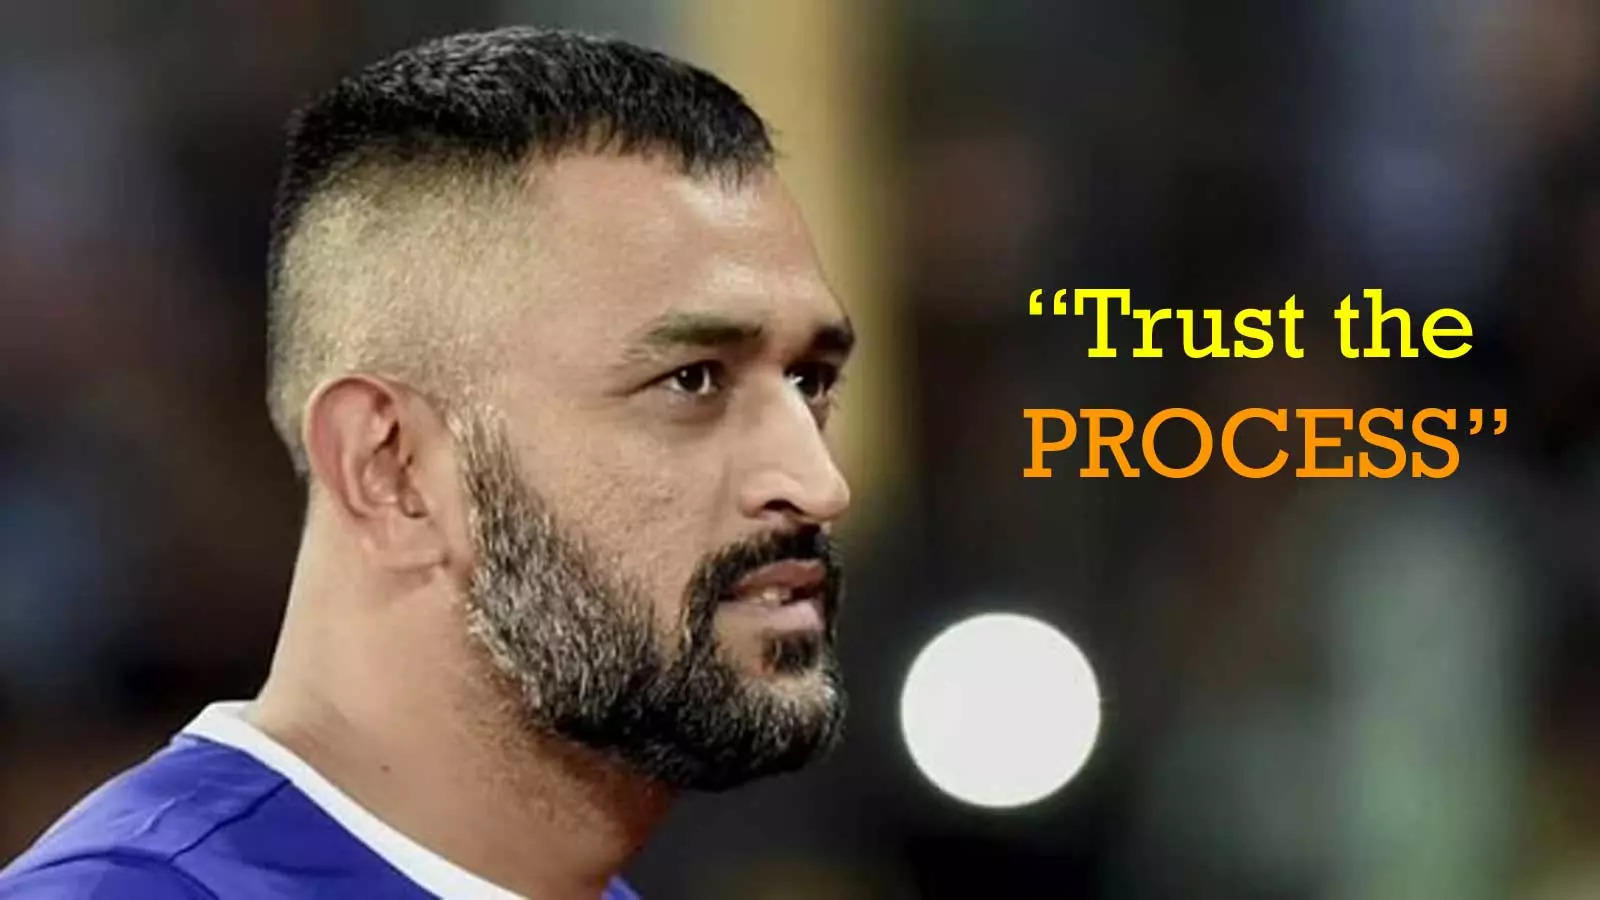 Watch: The iconic MS Dhoni quote that encapsulates his entire thought  process as cricketer